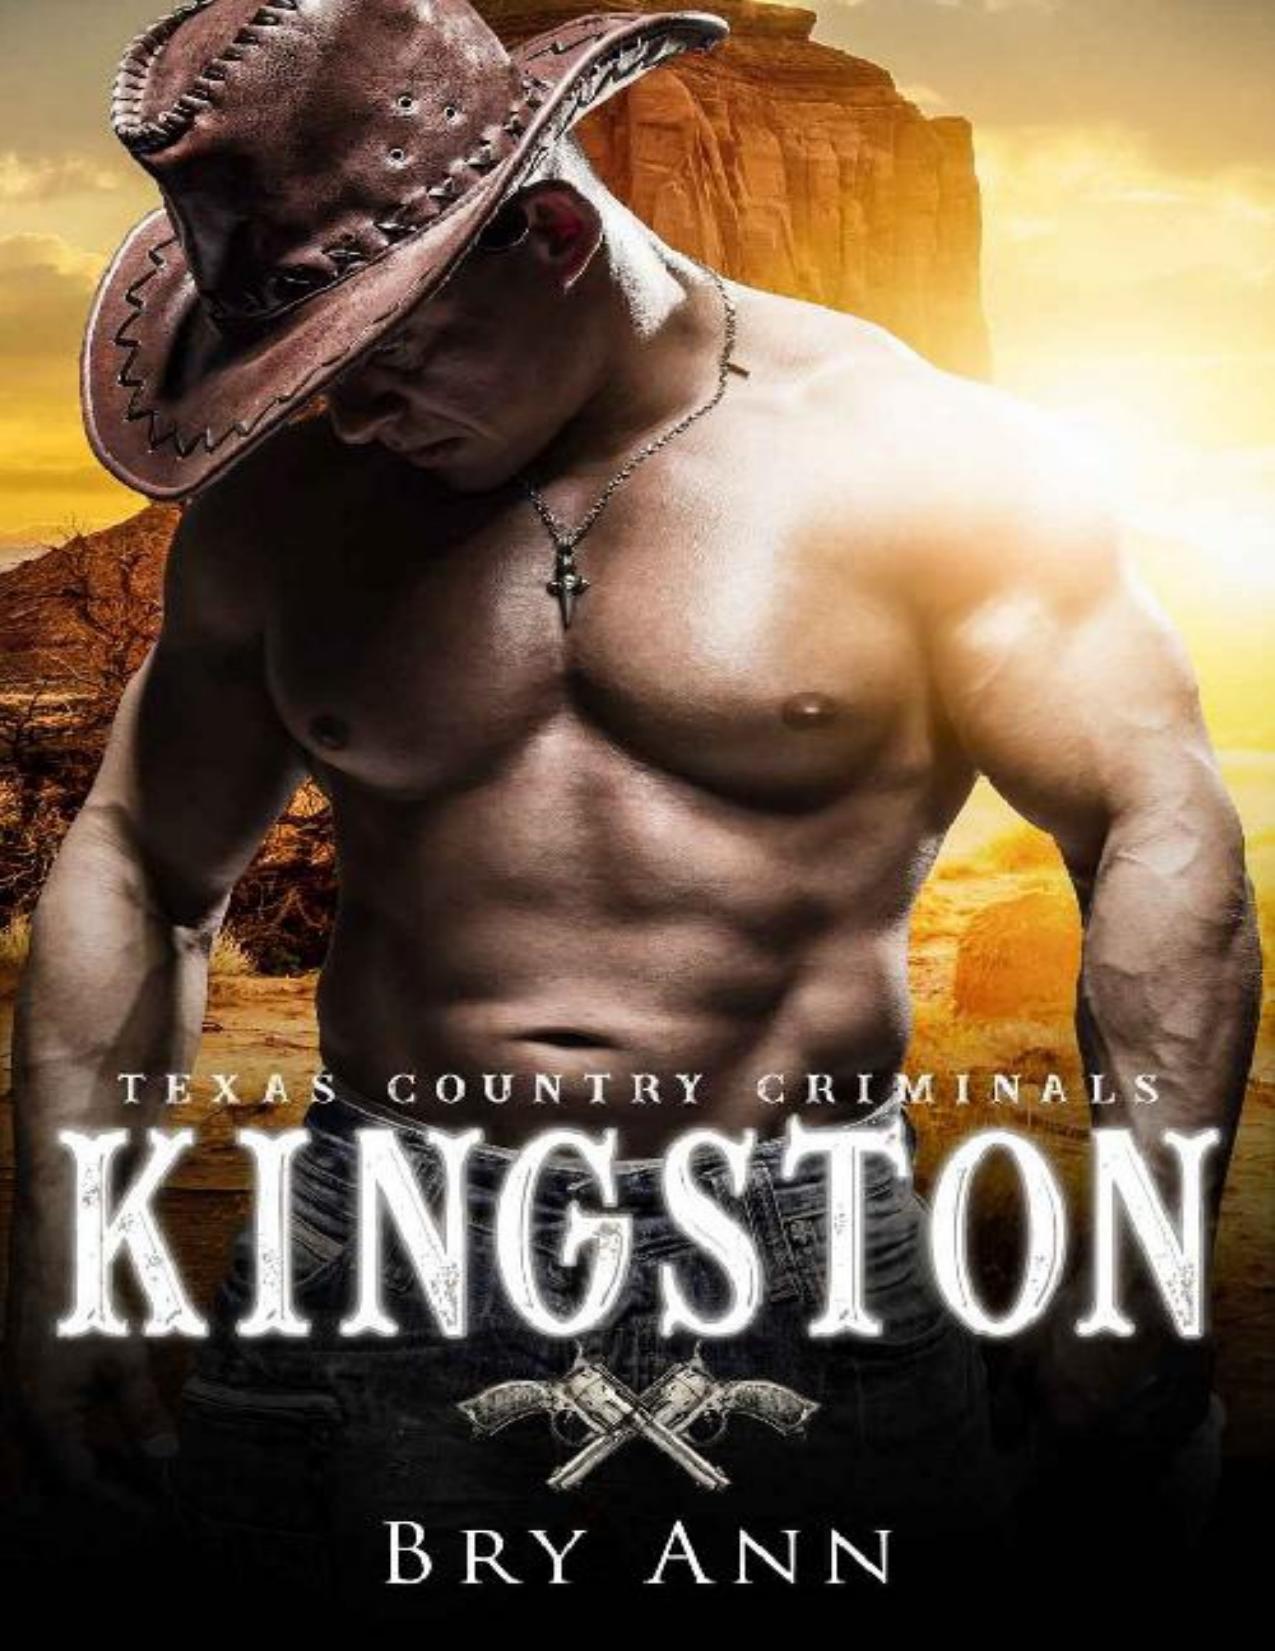 KINGSTON: A Country Romance (Texas Country Criminals Book 1)